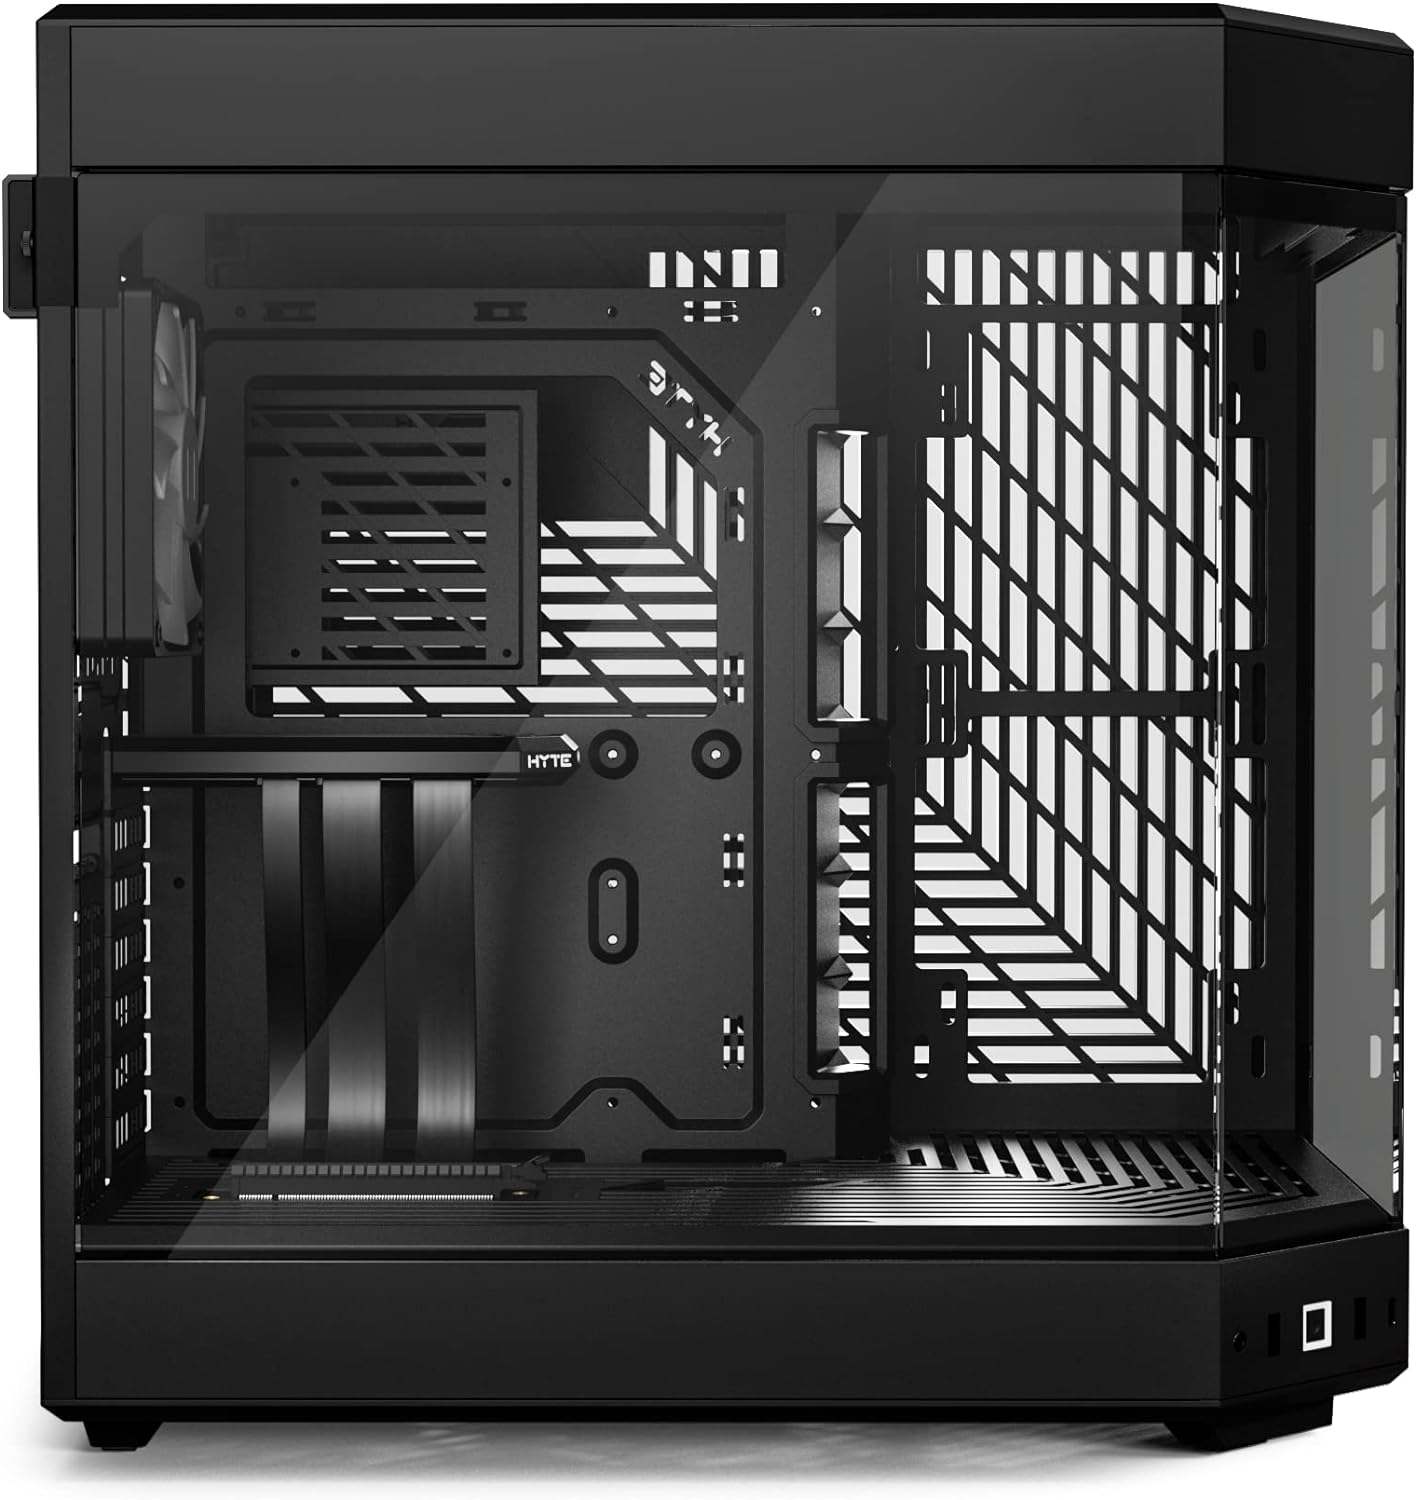 SKU: 0848604042855, Barcode: 848604042855 - HYTE Y60 Modern Aesthetic Mid-Tower ATX Gaming Case - Tempered Glass, PCIE 4.0 Riser Cable - Black: Antechamber construction for cable management and aesthetics.